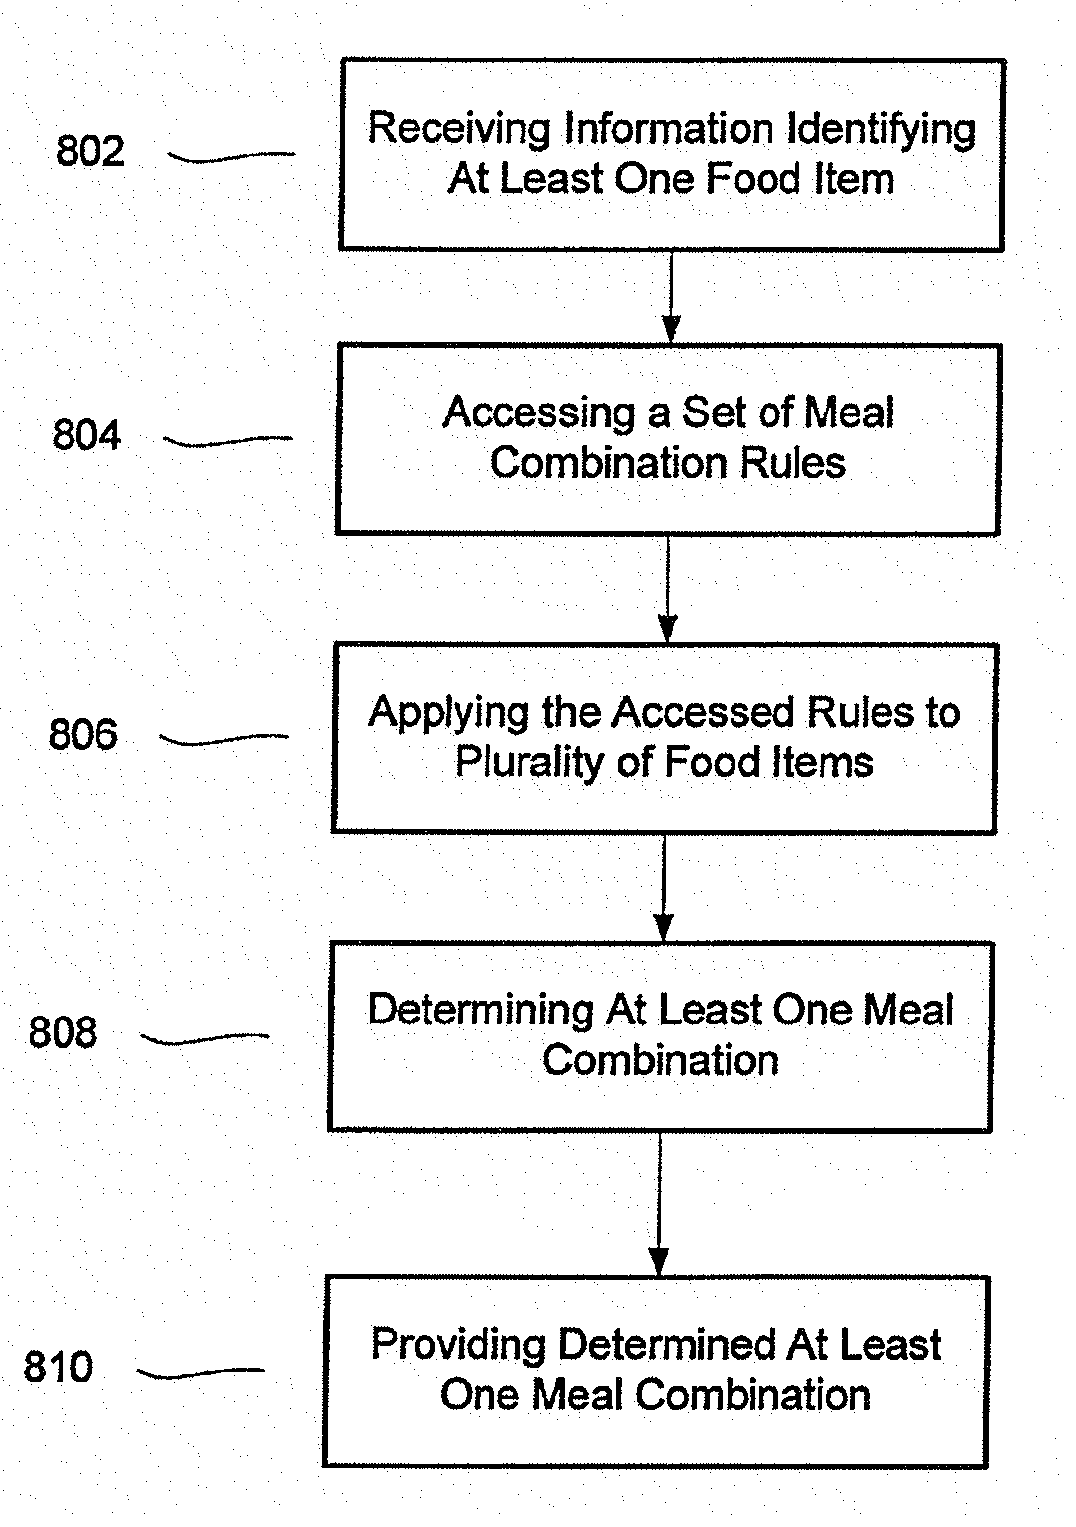 Determining a meal and/or meal plan